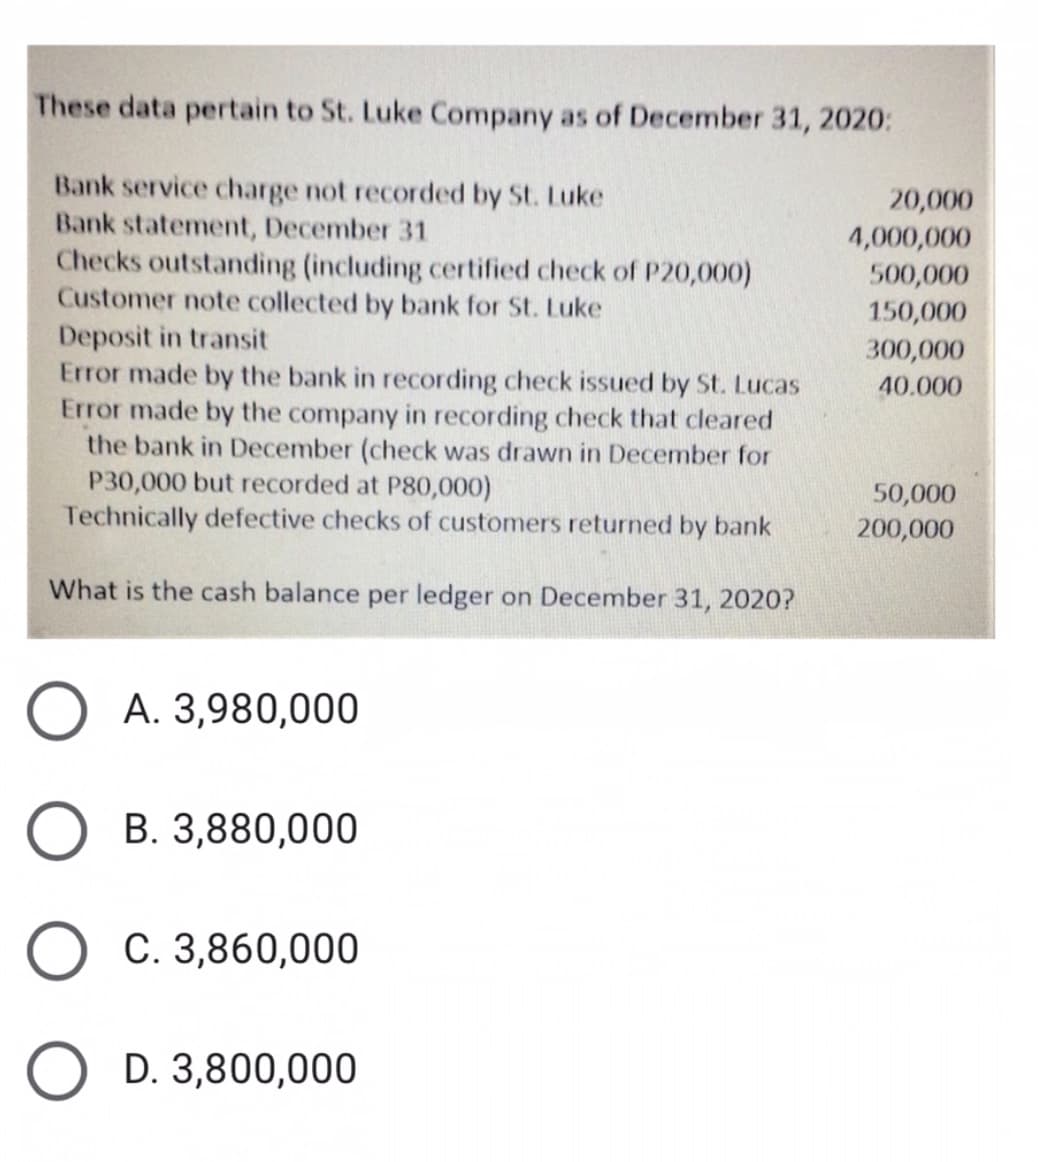 These data pertain to St. Luke Company as of December 31, 2020:
Bank service charge not recorded by St. Luke
Bank statement, December 31
Checks outstanding (including certified check of P20,000)
Customer note collected by bank for St. Luke
Deposit in transit
Error made by the bank in recording check issued by St. Lucas
Error made by the company in recording check that cleared
the bank in December (check was drawn in December for
P30,000 but recorded at P80,000)
Technically defective checks of customers returned by bank
20,000
4,000,000
500,000
150,000
300,000
40.000
50,000
200,000
What is the cash balance per ledger on December 31, 2020?
A. 3,980,000
B. 3,880,000
C. 3,860,000
D. 3,800,000
